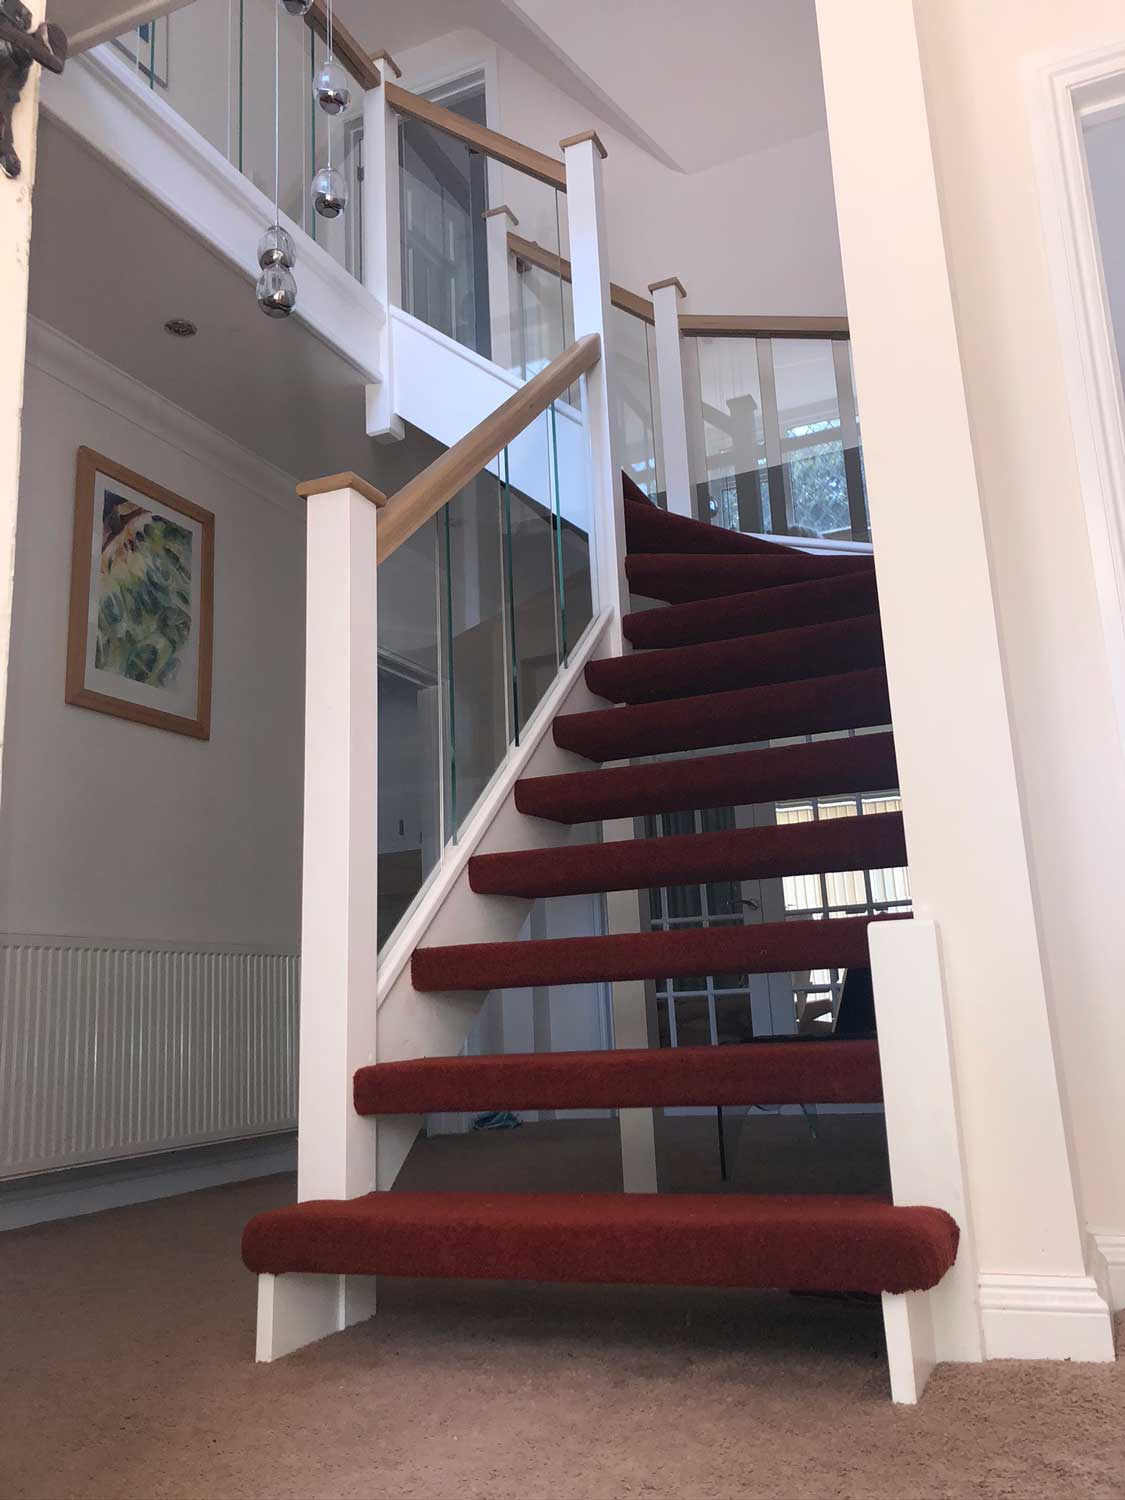 winding Open Riser staircase with glass baluseters